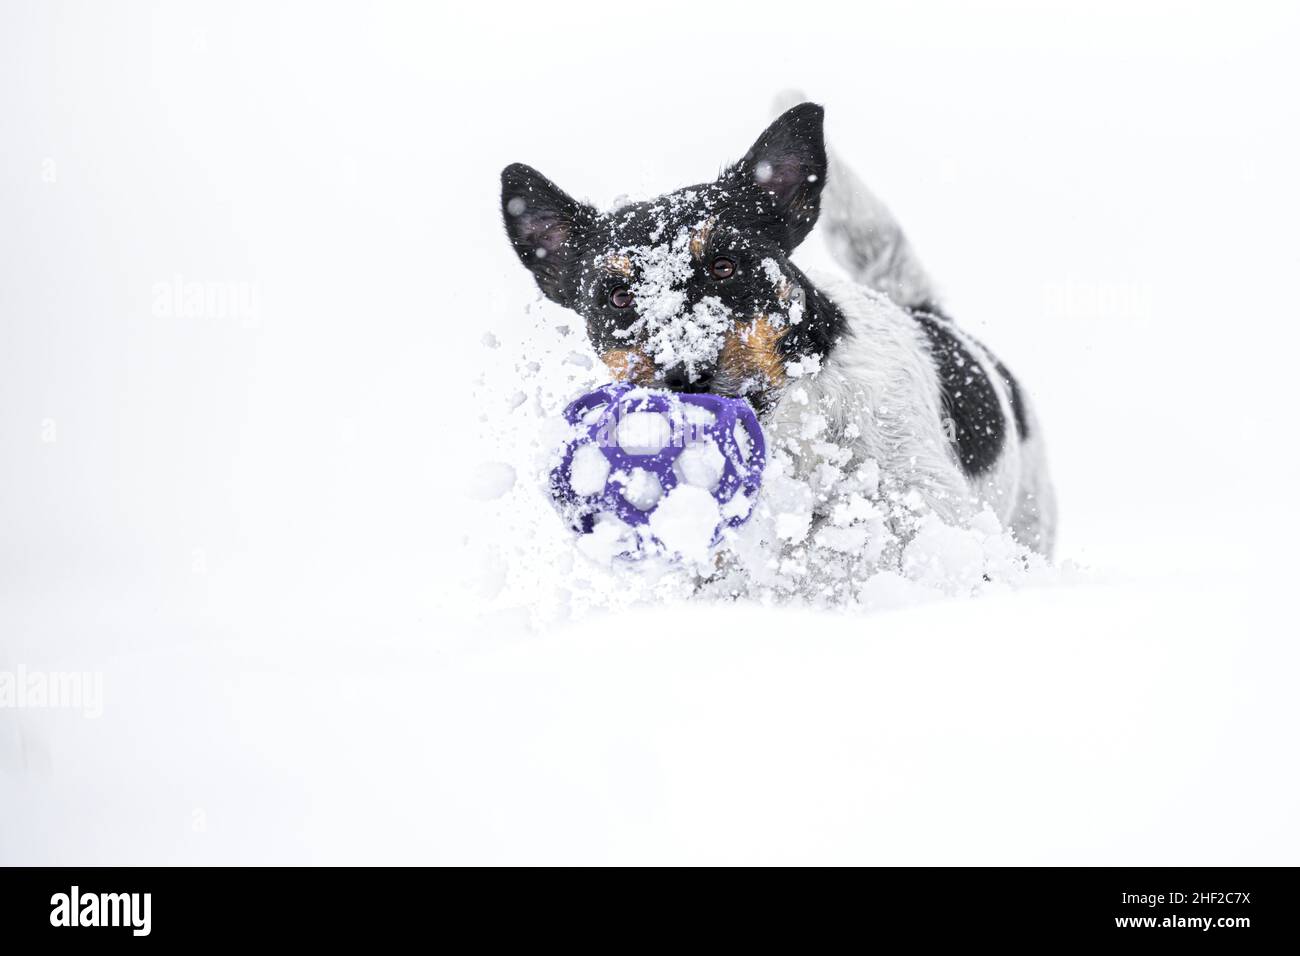 A cute small dog runs fast over a meadow in the snowy winter playing and holding a grid ball in its mouth Stock Photo